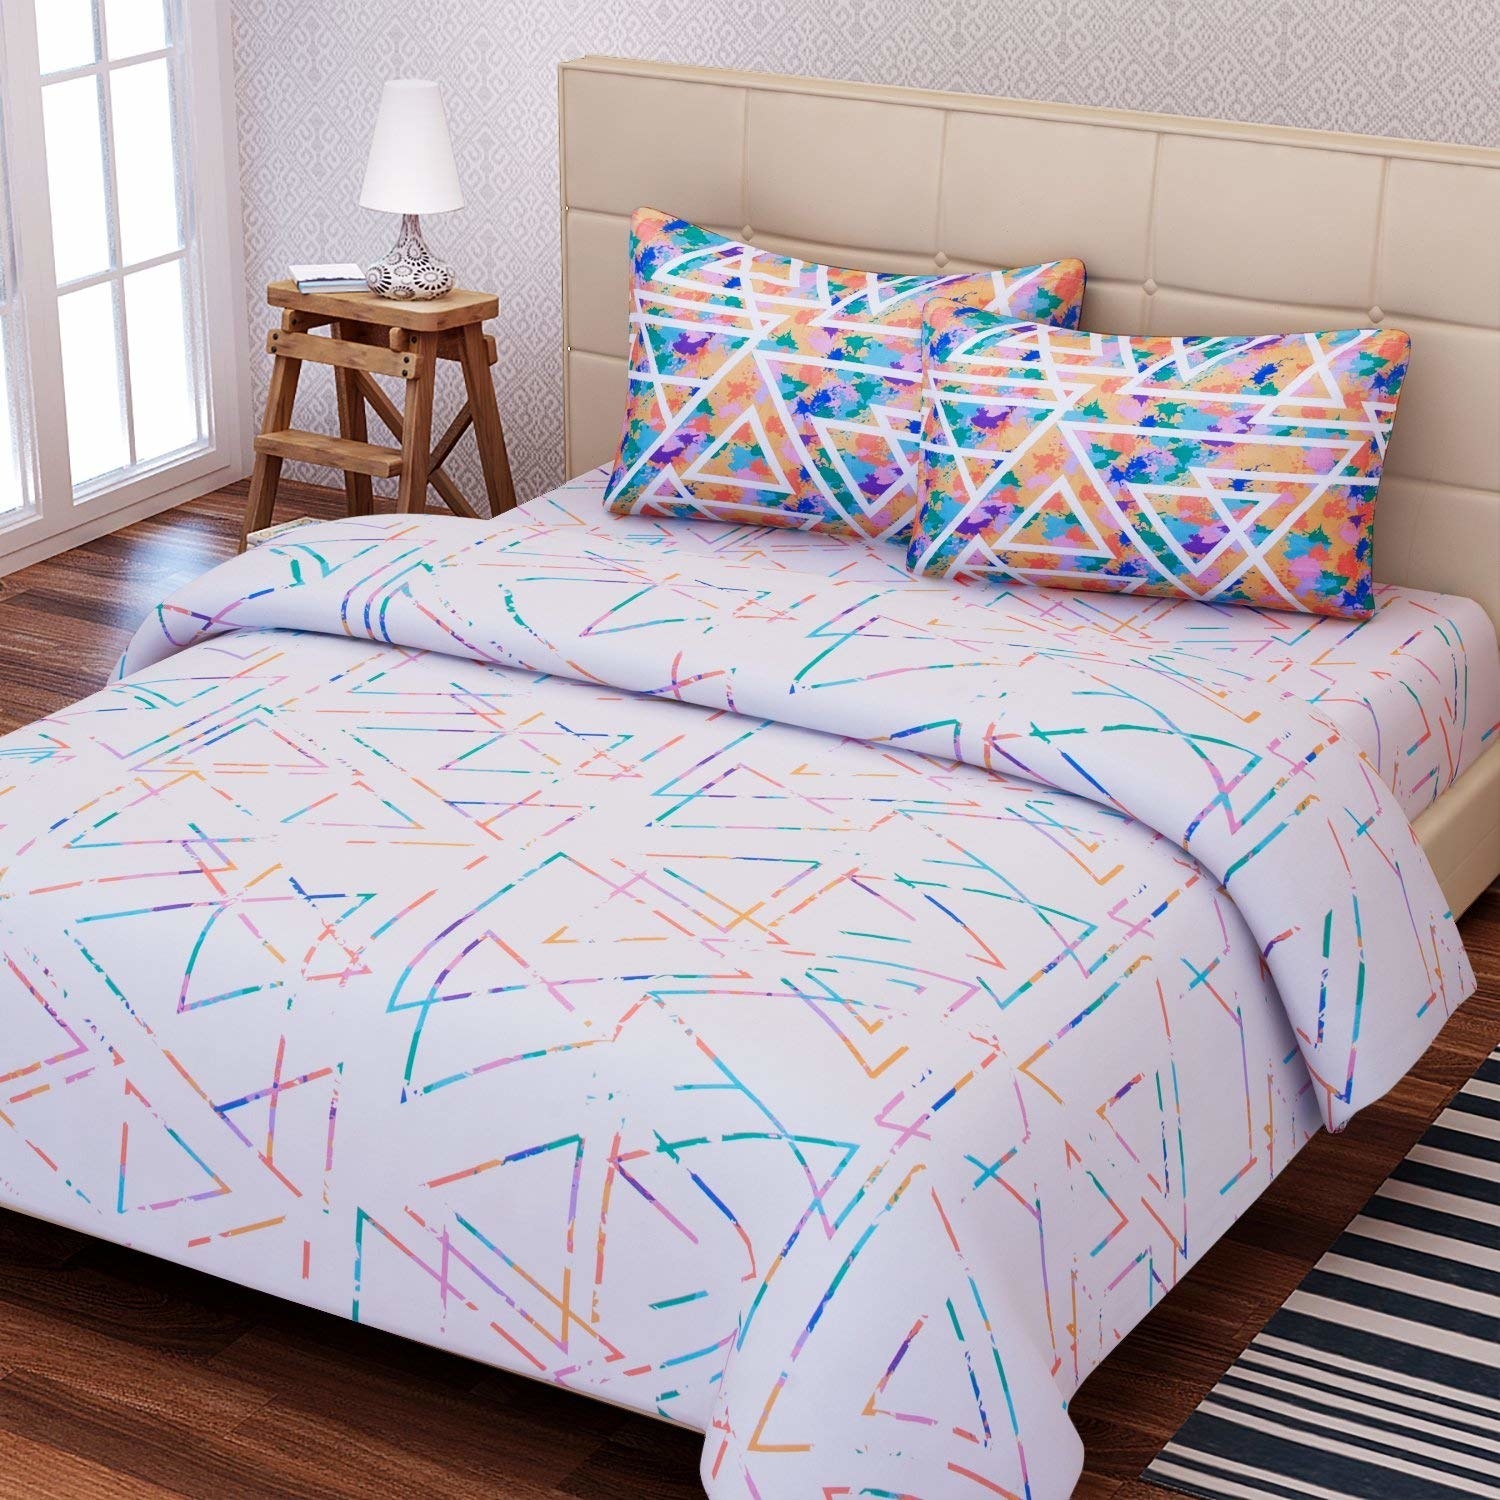 A geometric bedsheet on a bed